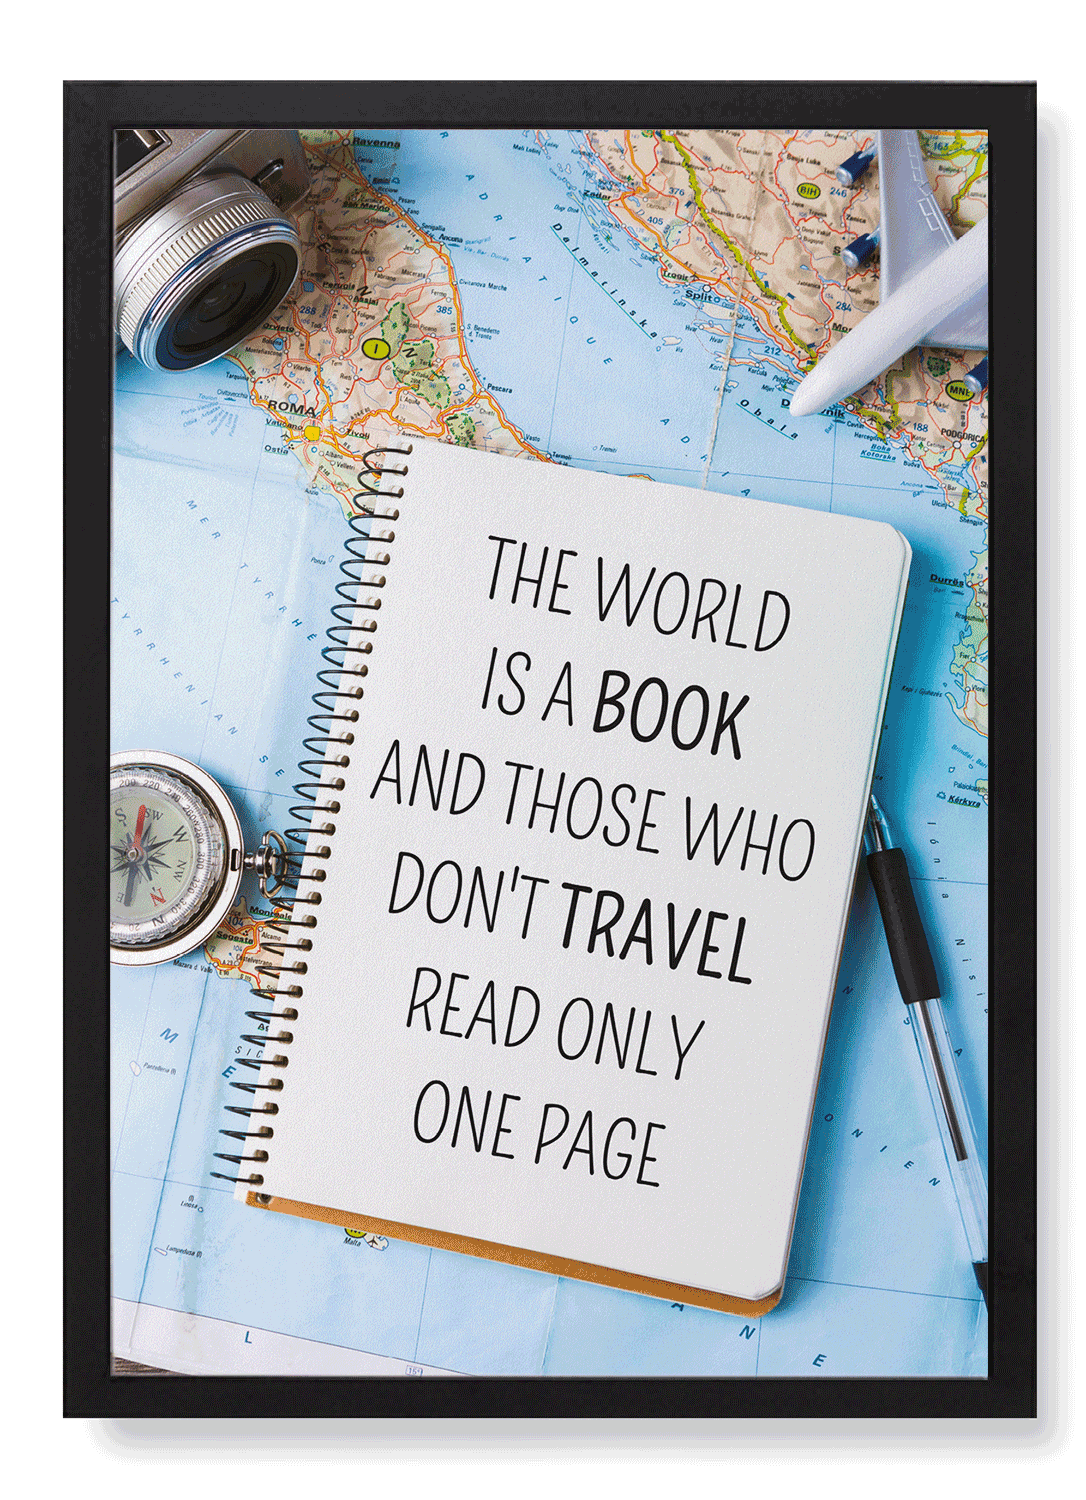 THE WORLD IS A BOOK